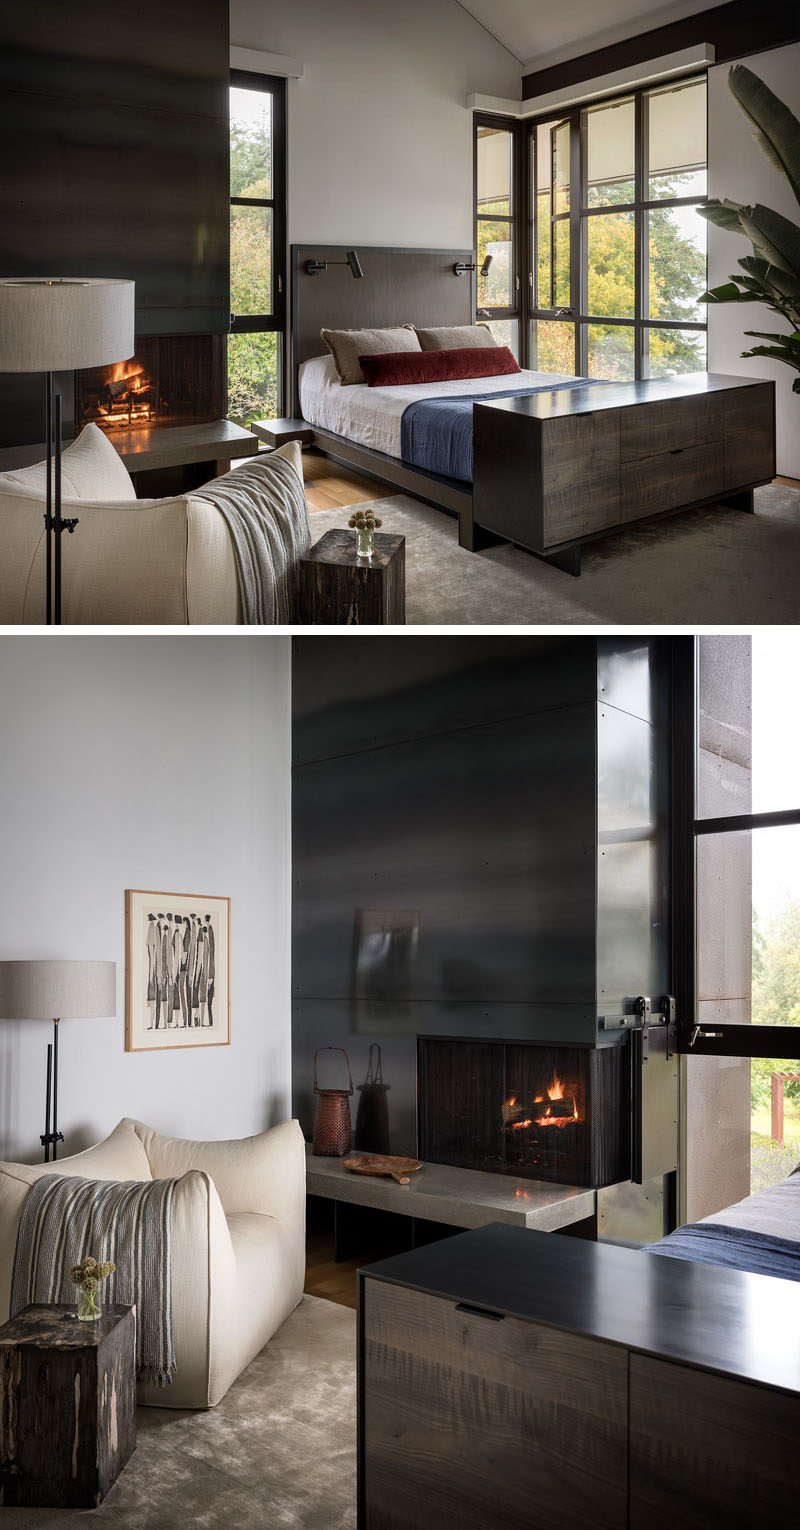 Bedroom Ideas - In this modern master bedroom, a custom leather and steel bed, designed by Geremia in collaboration with fabricator Tod Von Mertens, is complemented by a rolled steel and Thassos marble fireplace. #MasterBedroom #BedroomIdeas #Fireplace #SteelFireplace